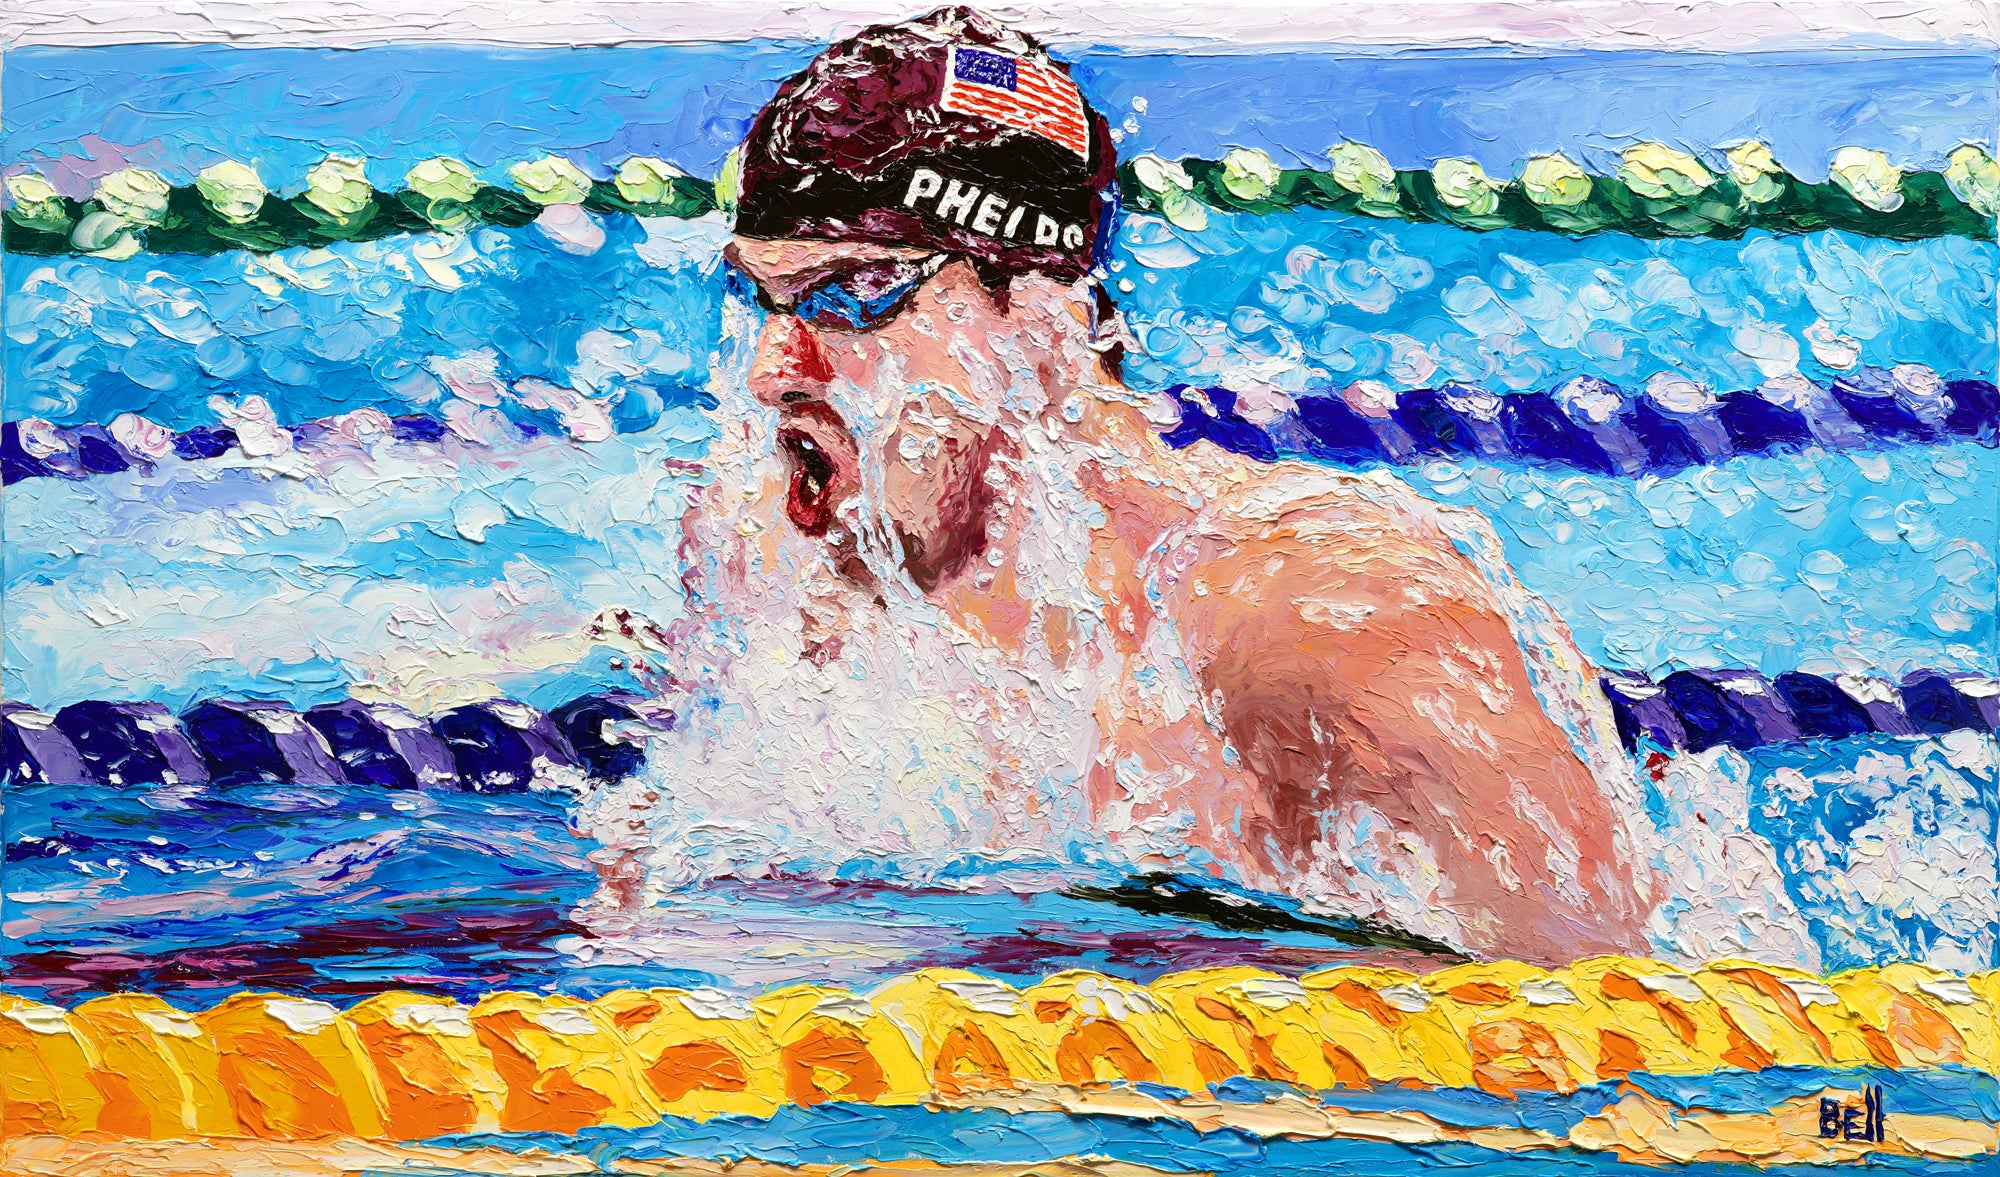 Michael Phelps By Noreen Kennedy escapeauthority